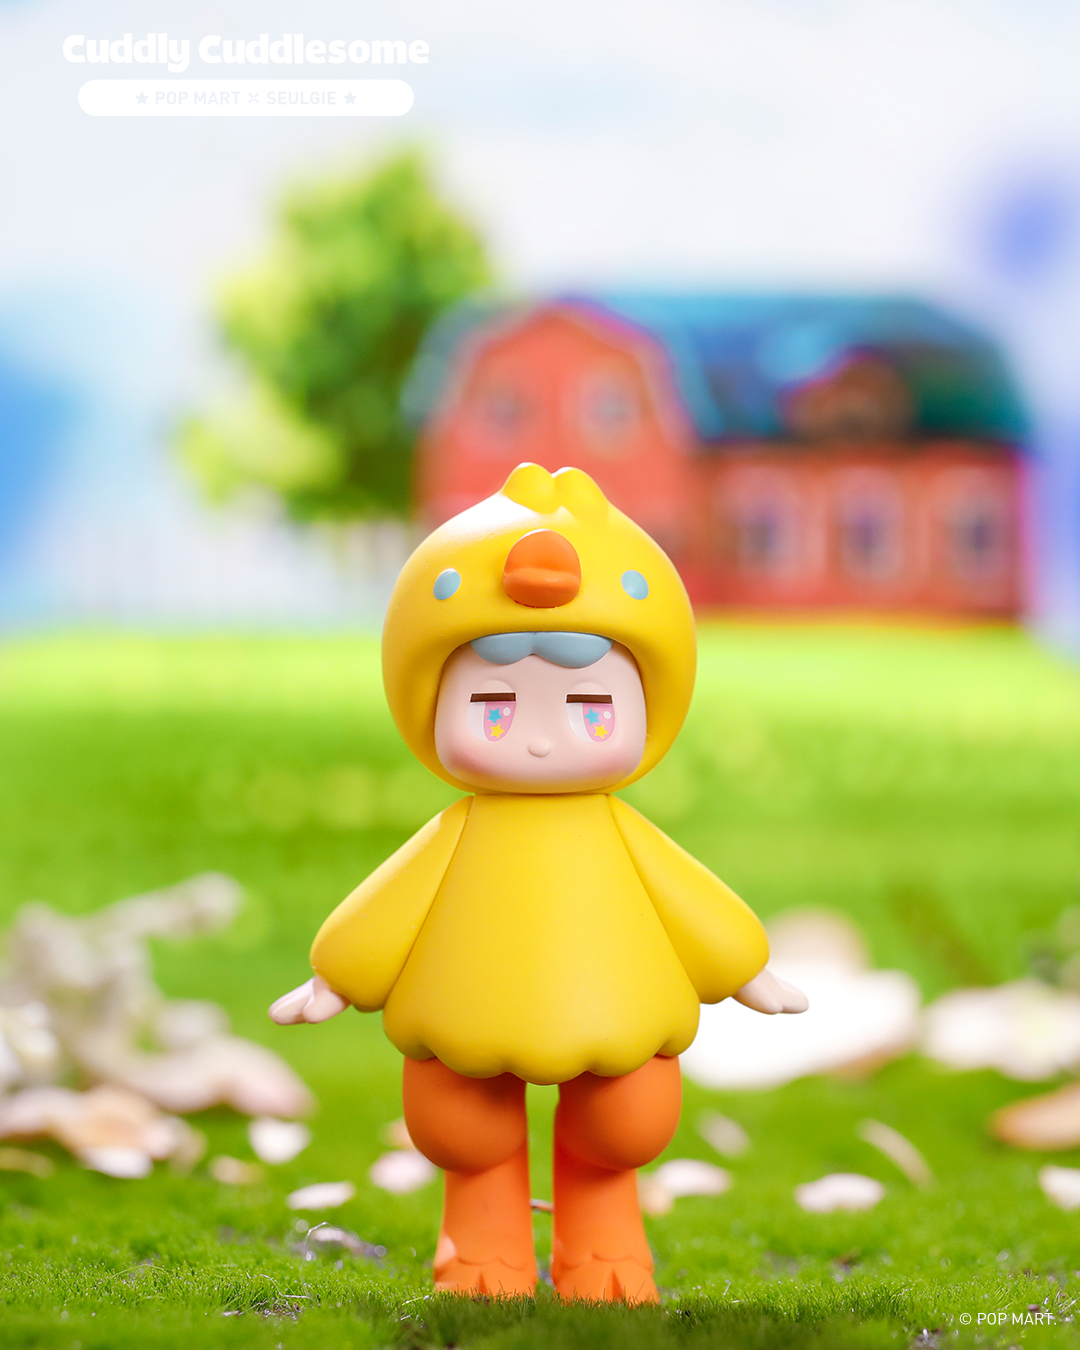 Rory Cuddly Cuddlesome Blind box Series by Seulgie x Pop Mart